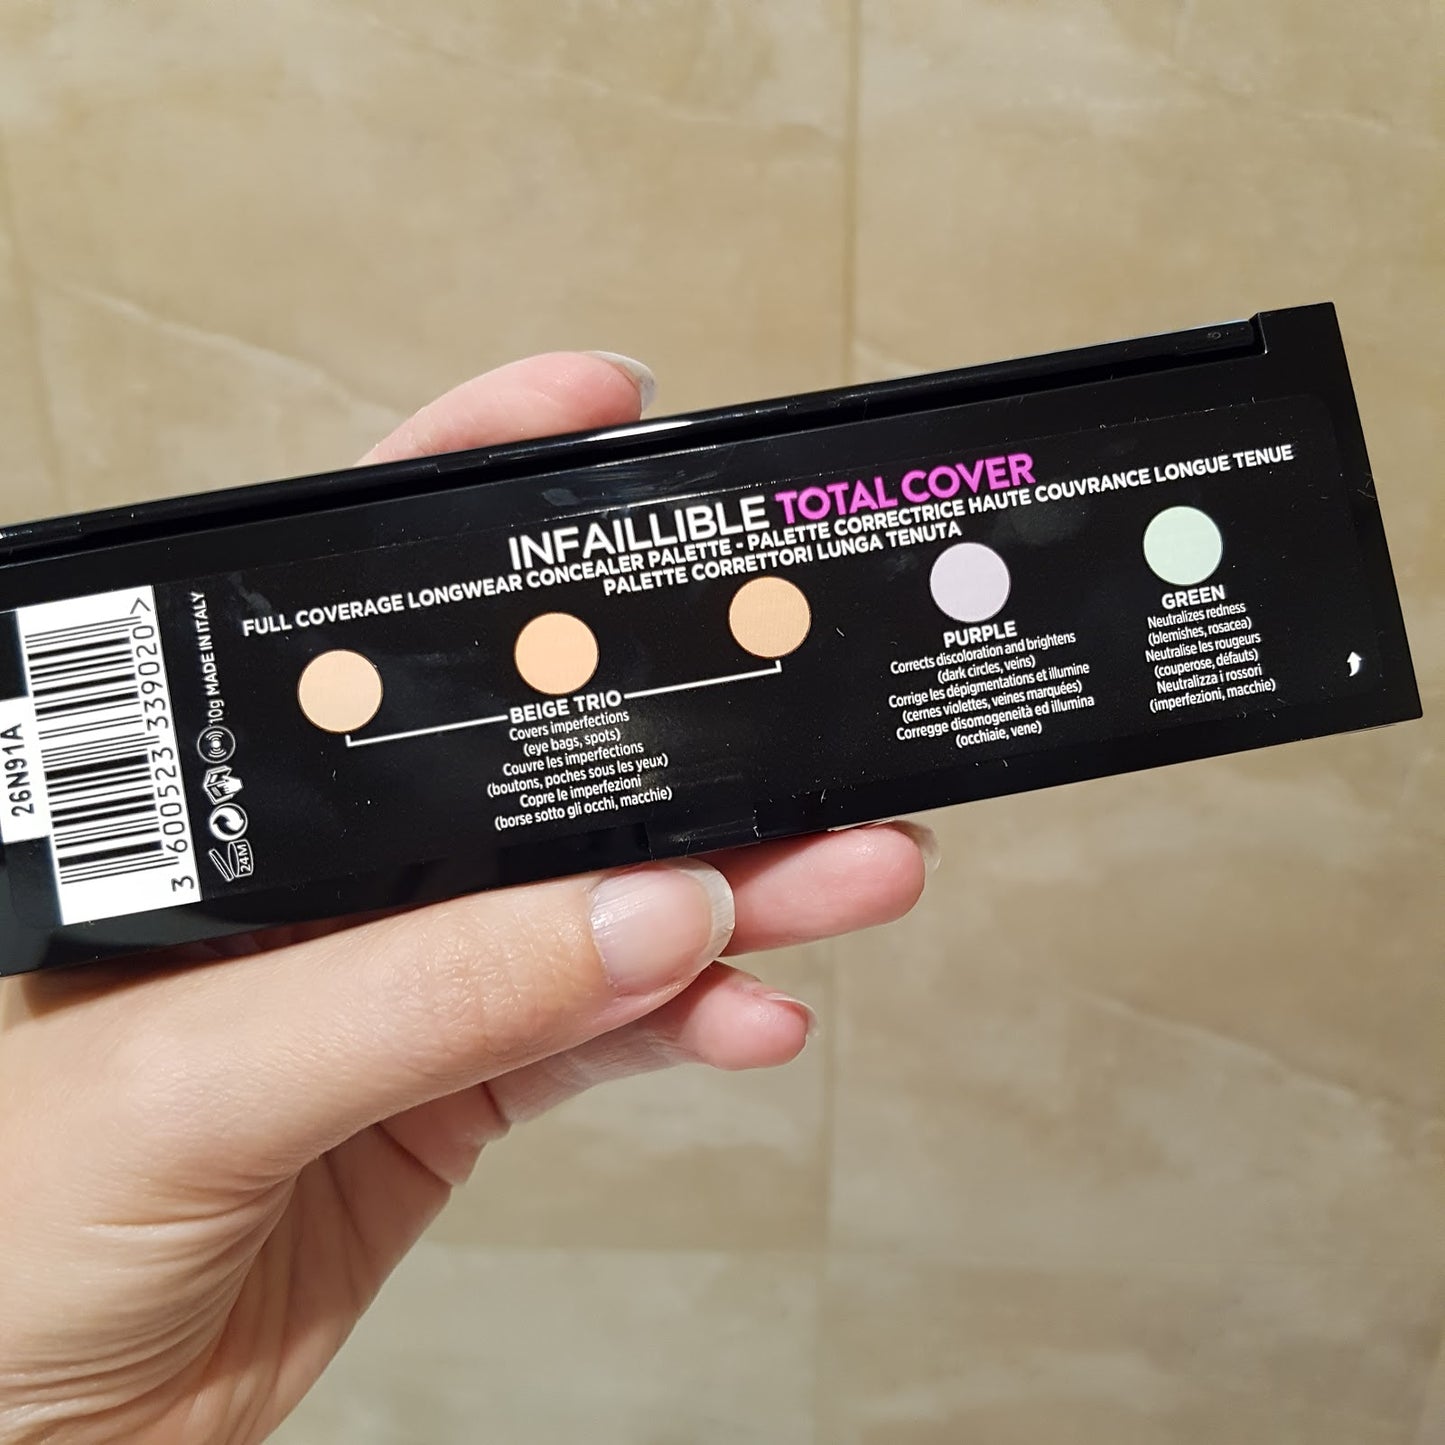 L'oreal Infallible Total Cover Concealer Palette